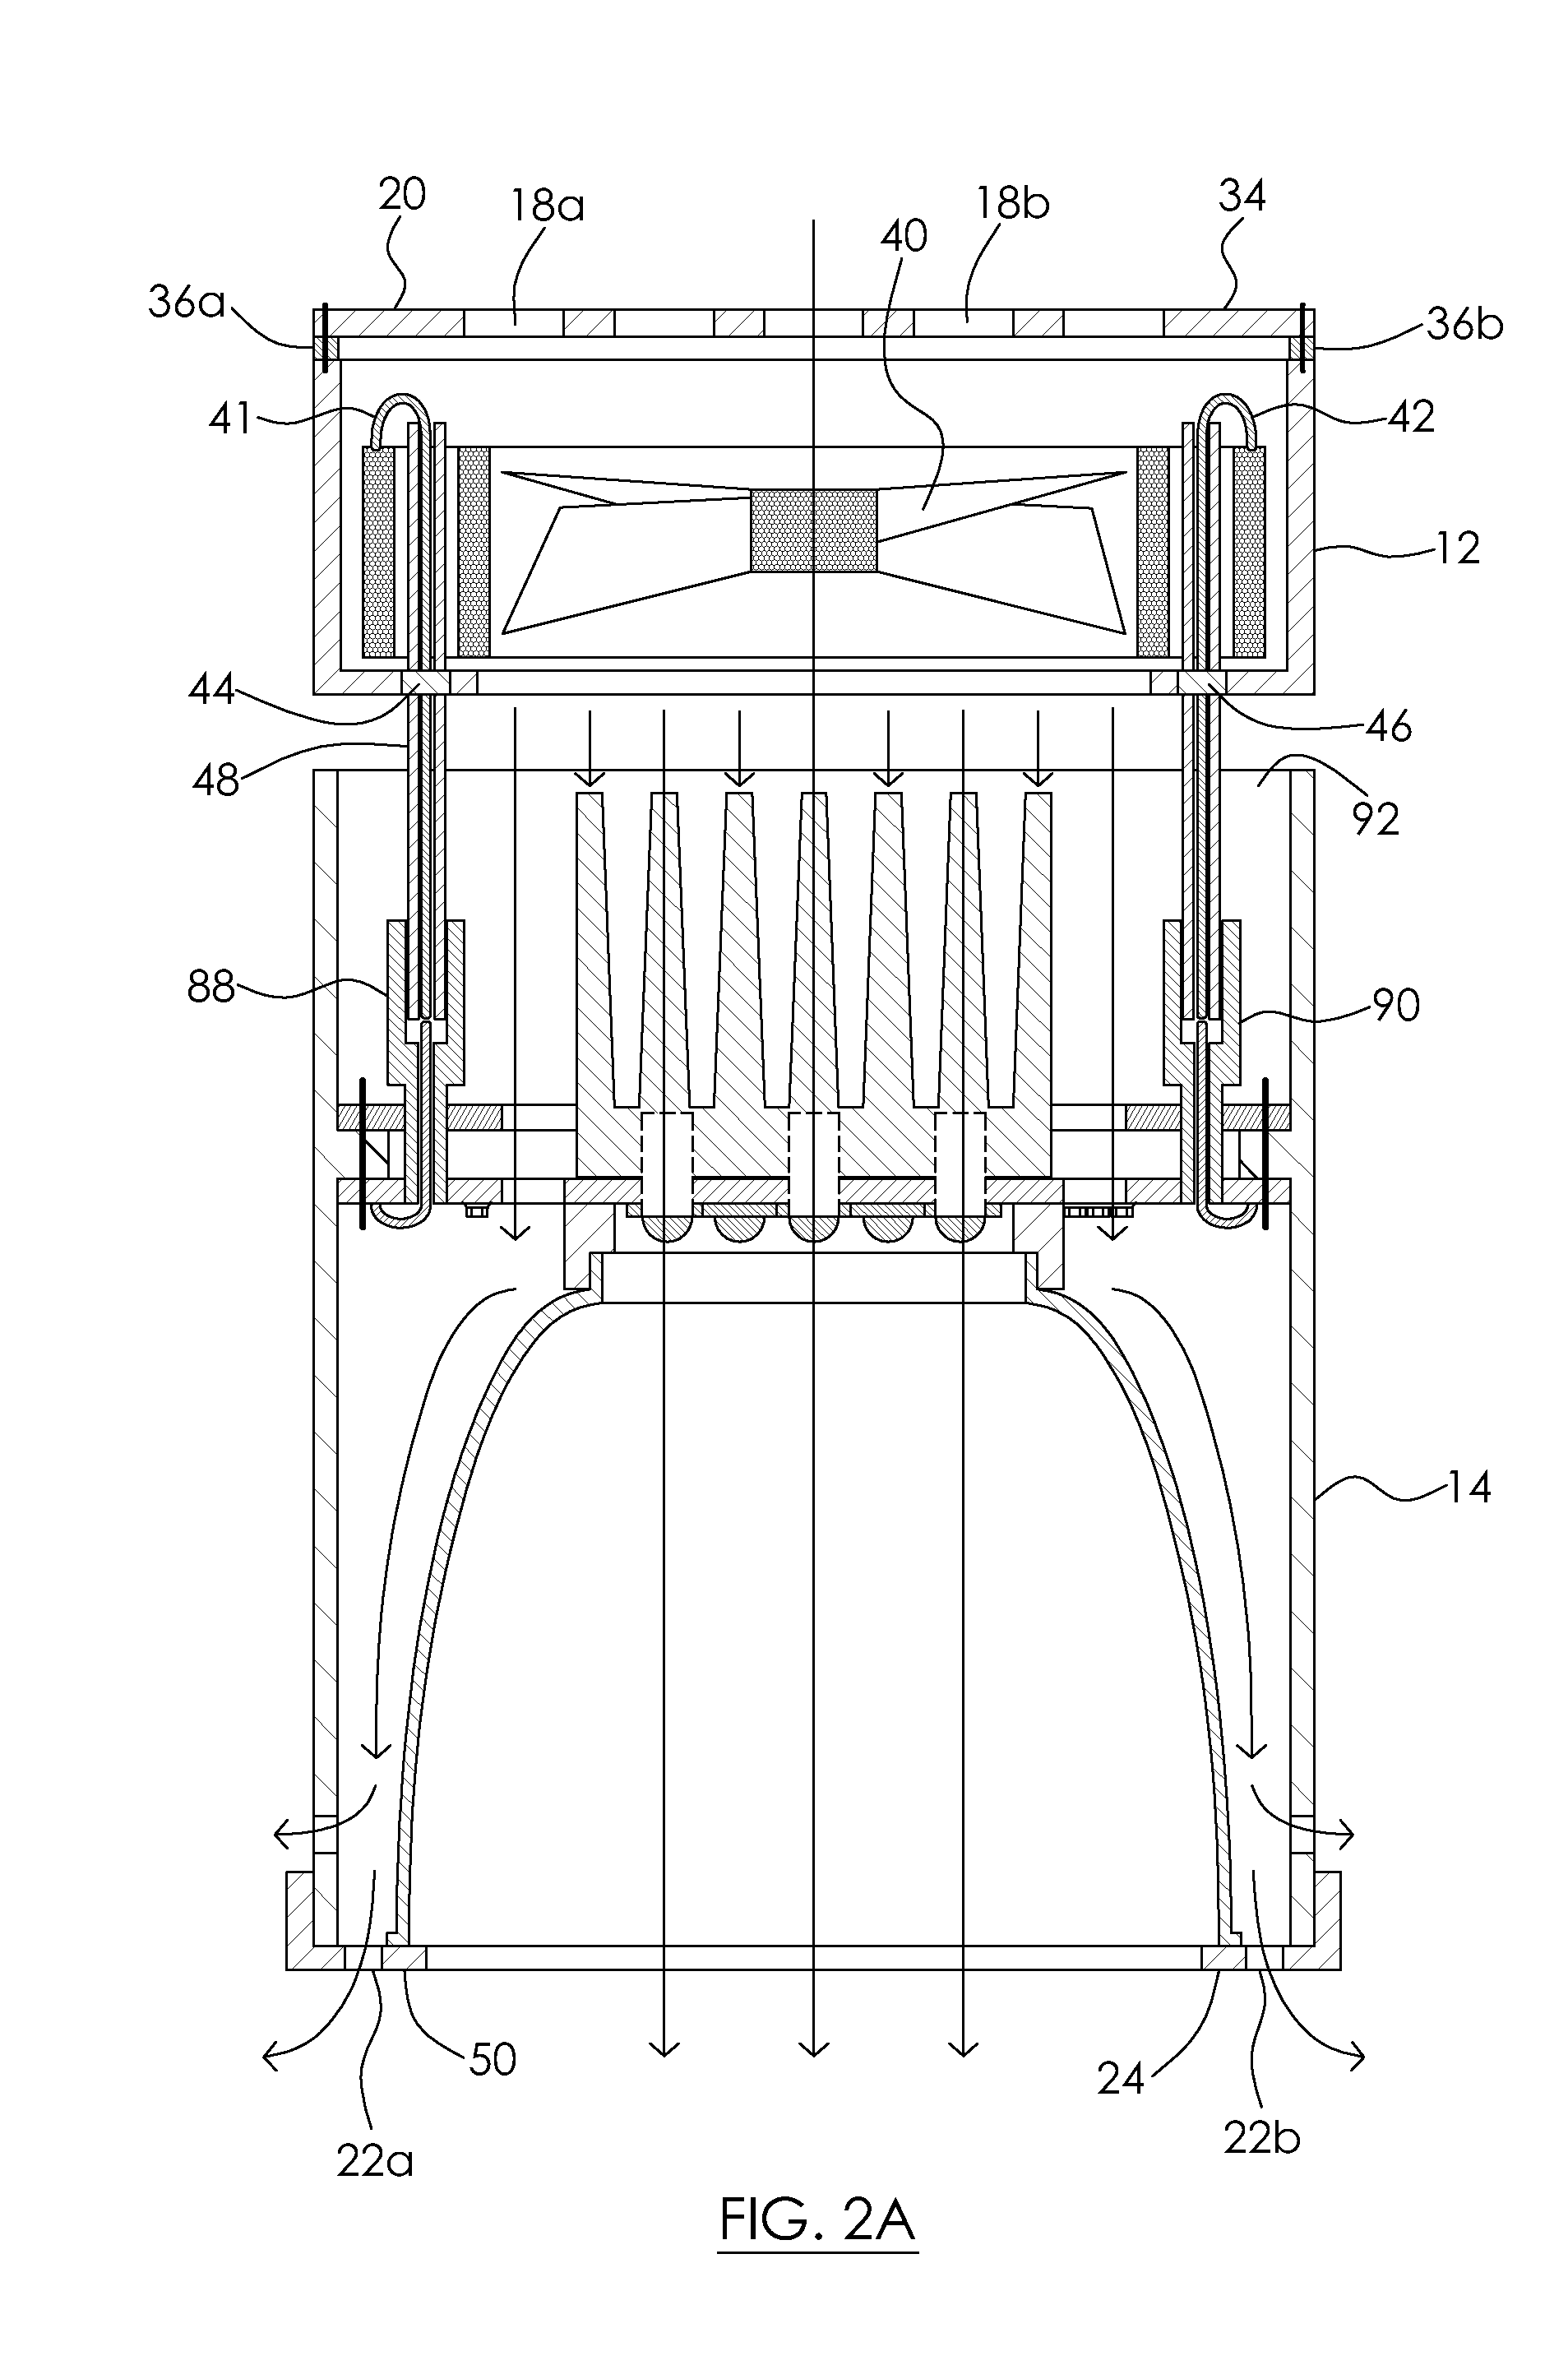 Light-emitting diode fixture with an improved thermal control system